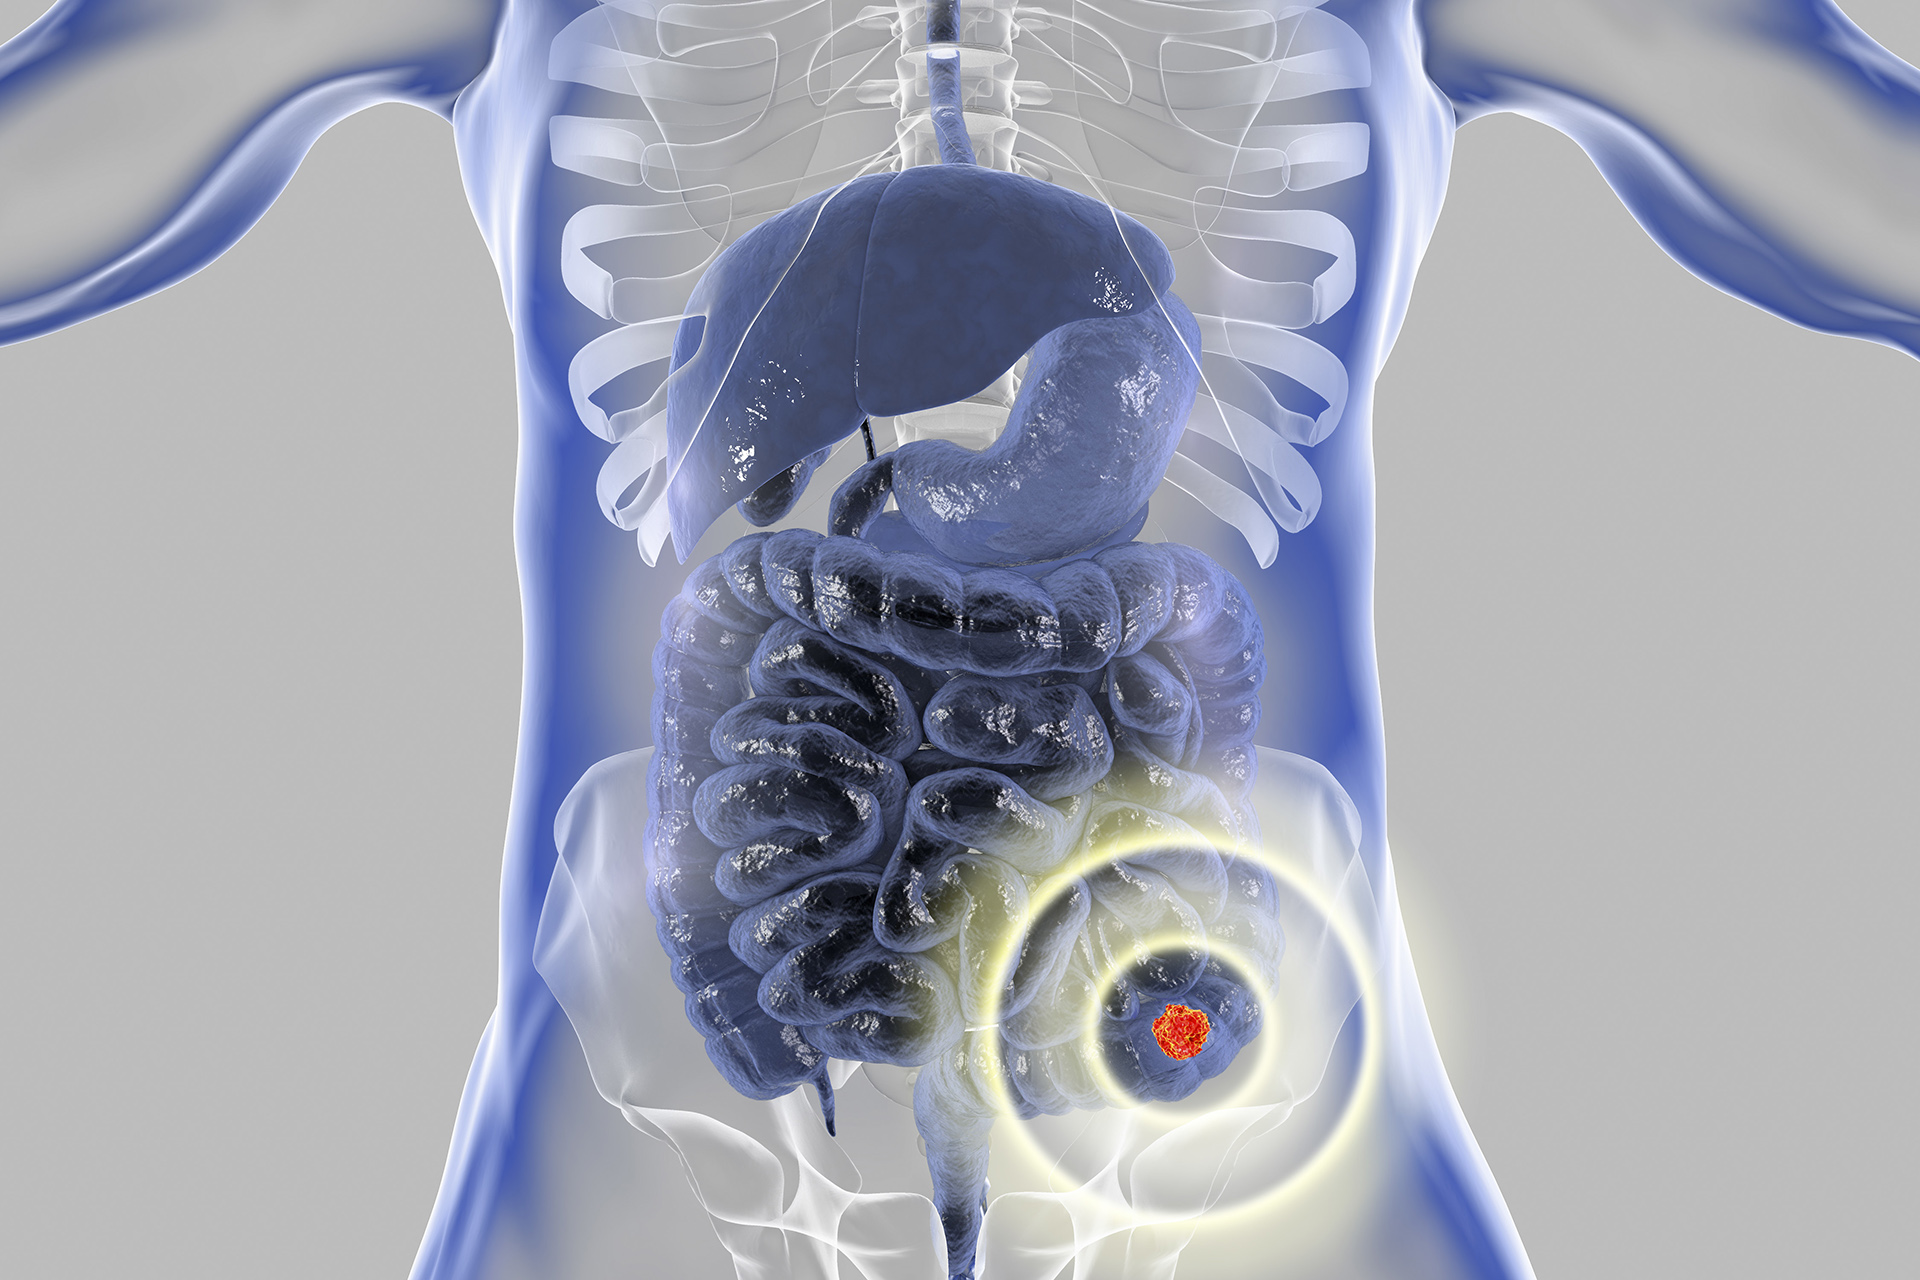 metastatic cancer from colon to liver